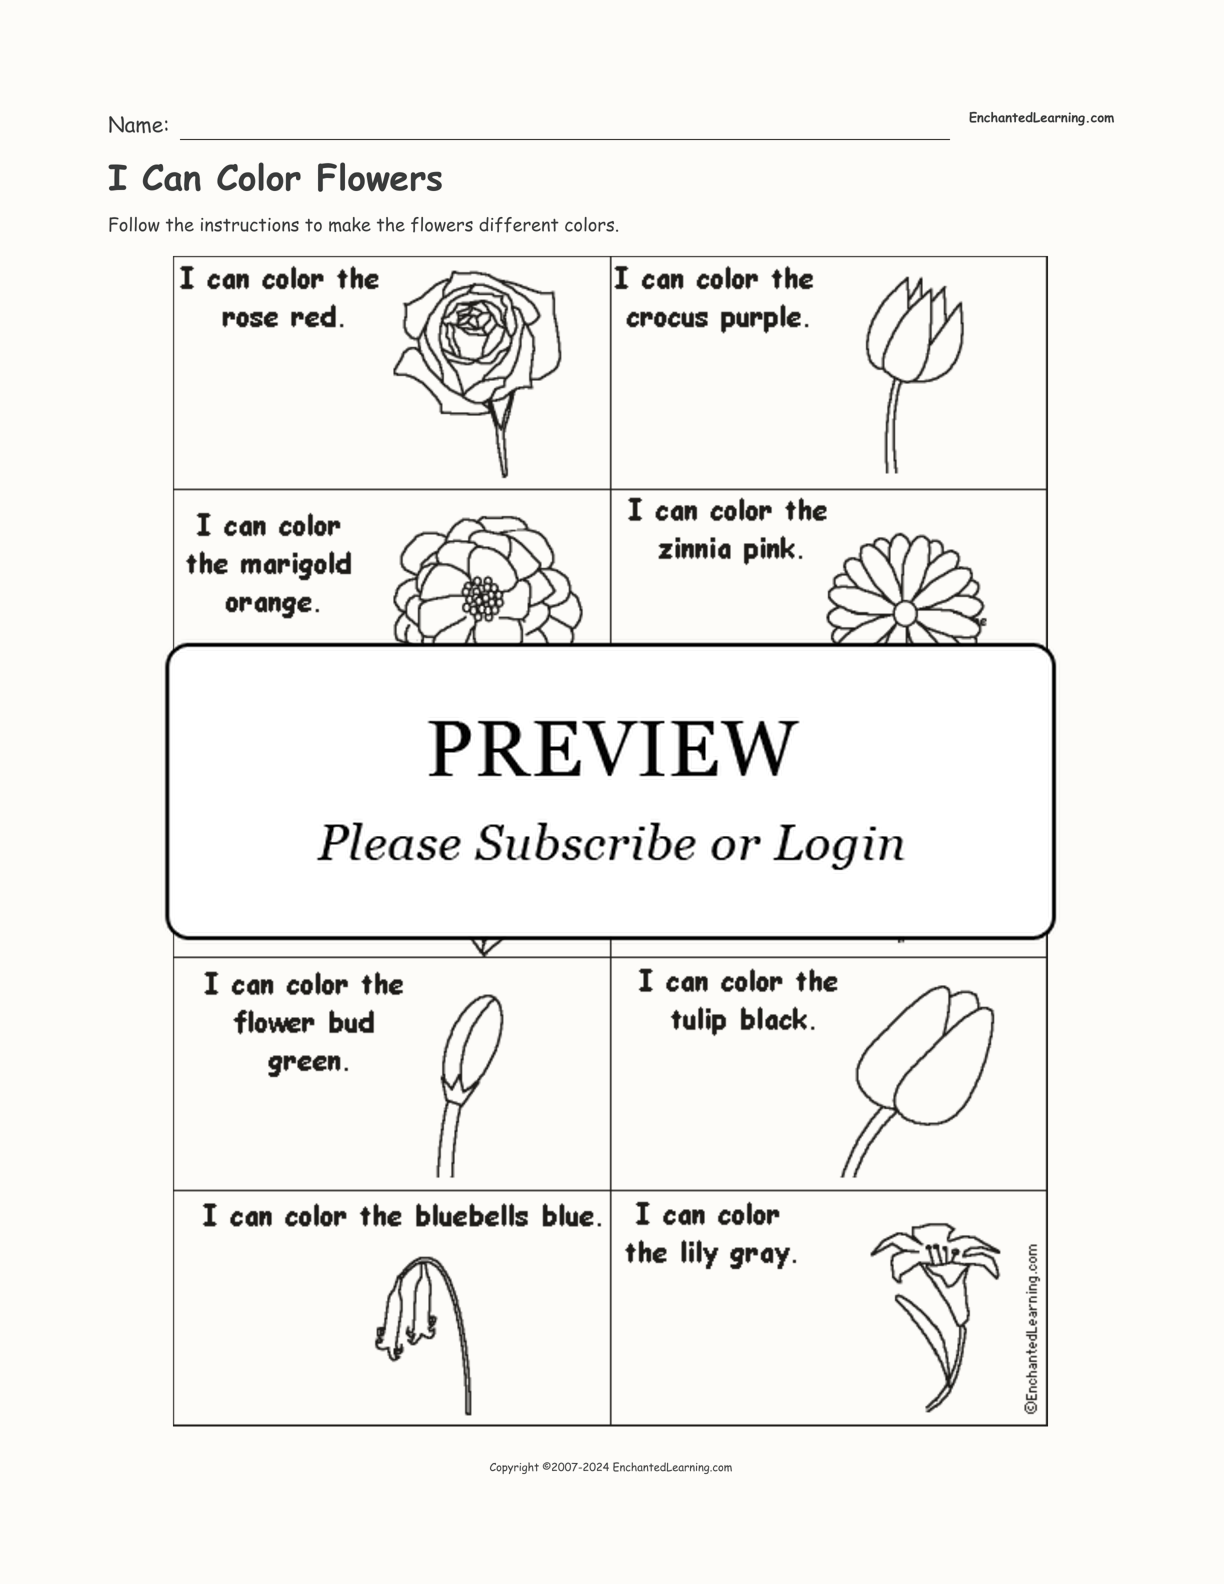 I Can Color Flowers interactive worksheet page 1